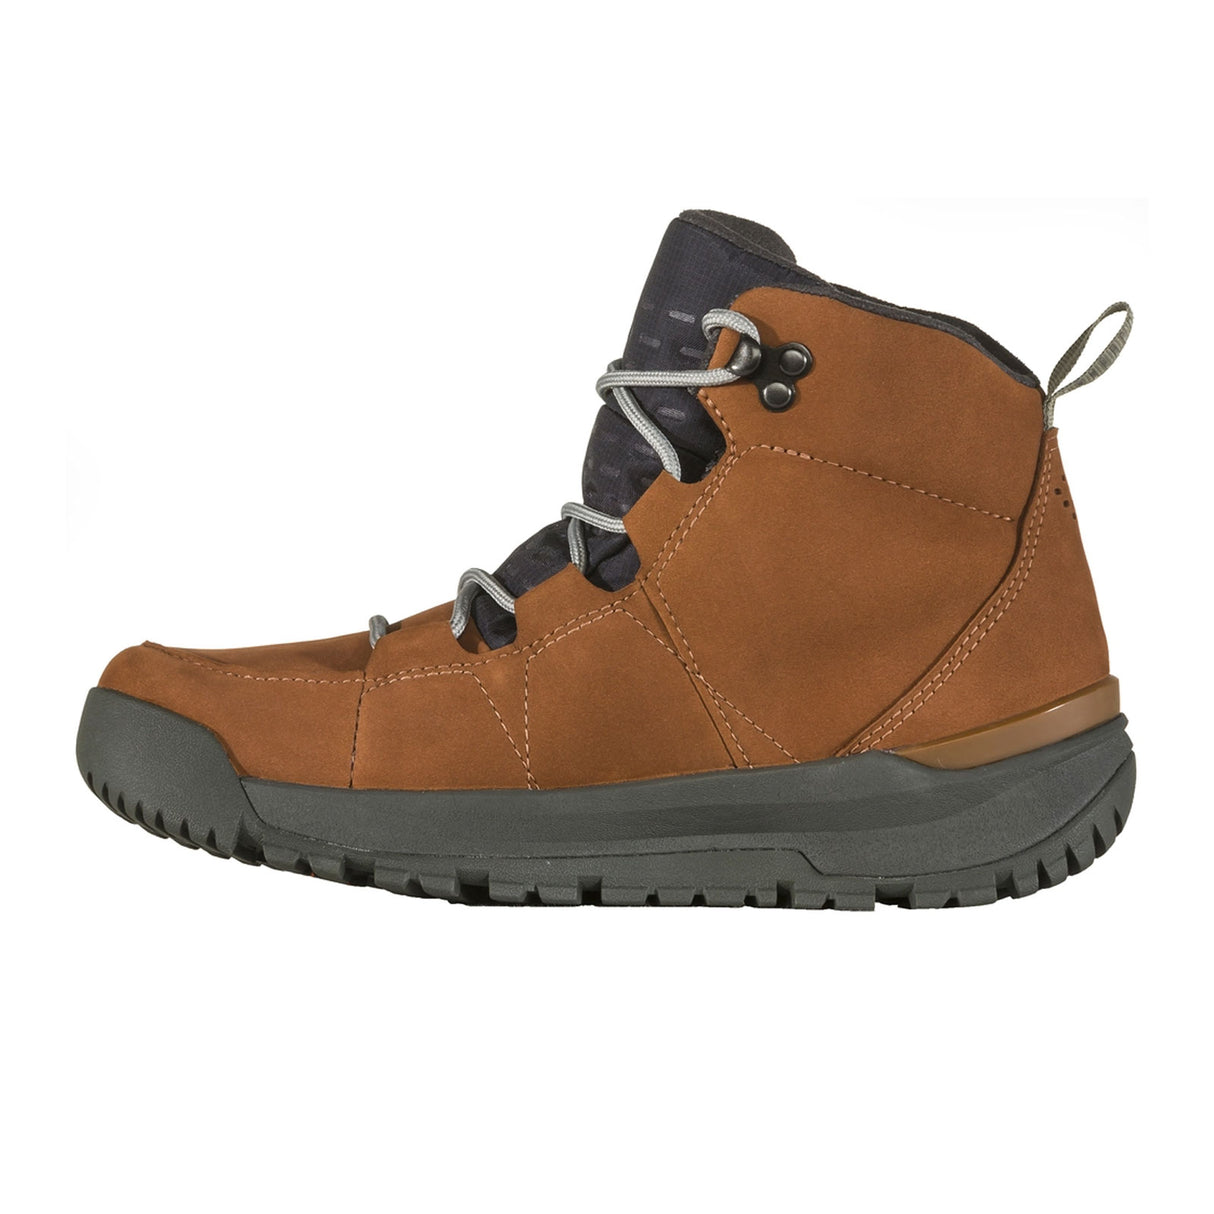 Oboz Sphinx Mid Insulated B-DRY Winter Boot (Women) - Desert Sun Boots - Winter - Low - The Heel Shoe Fitters